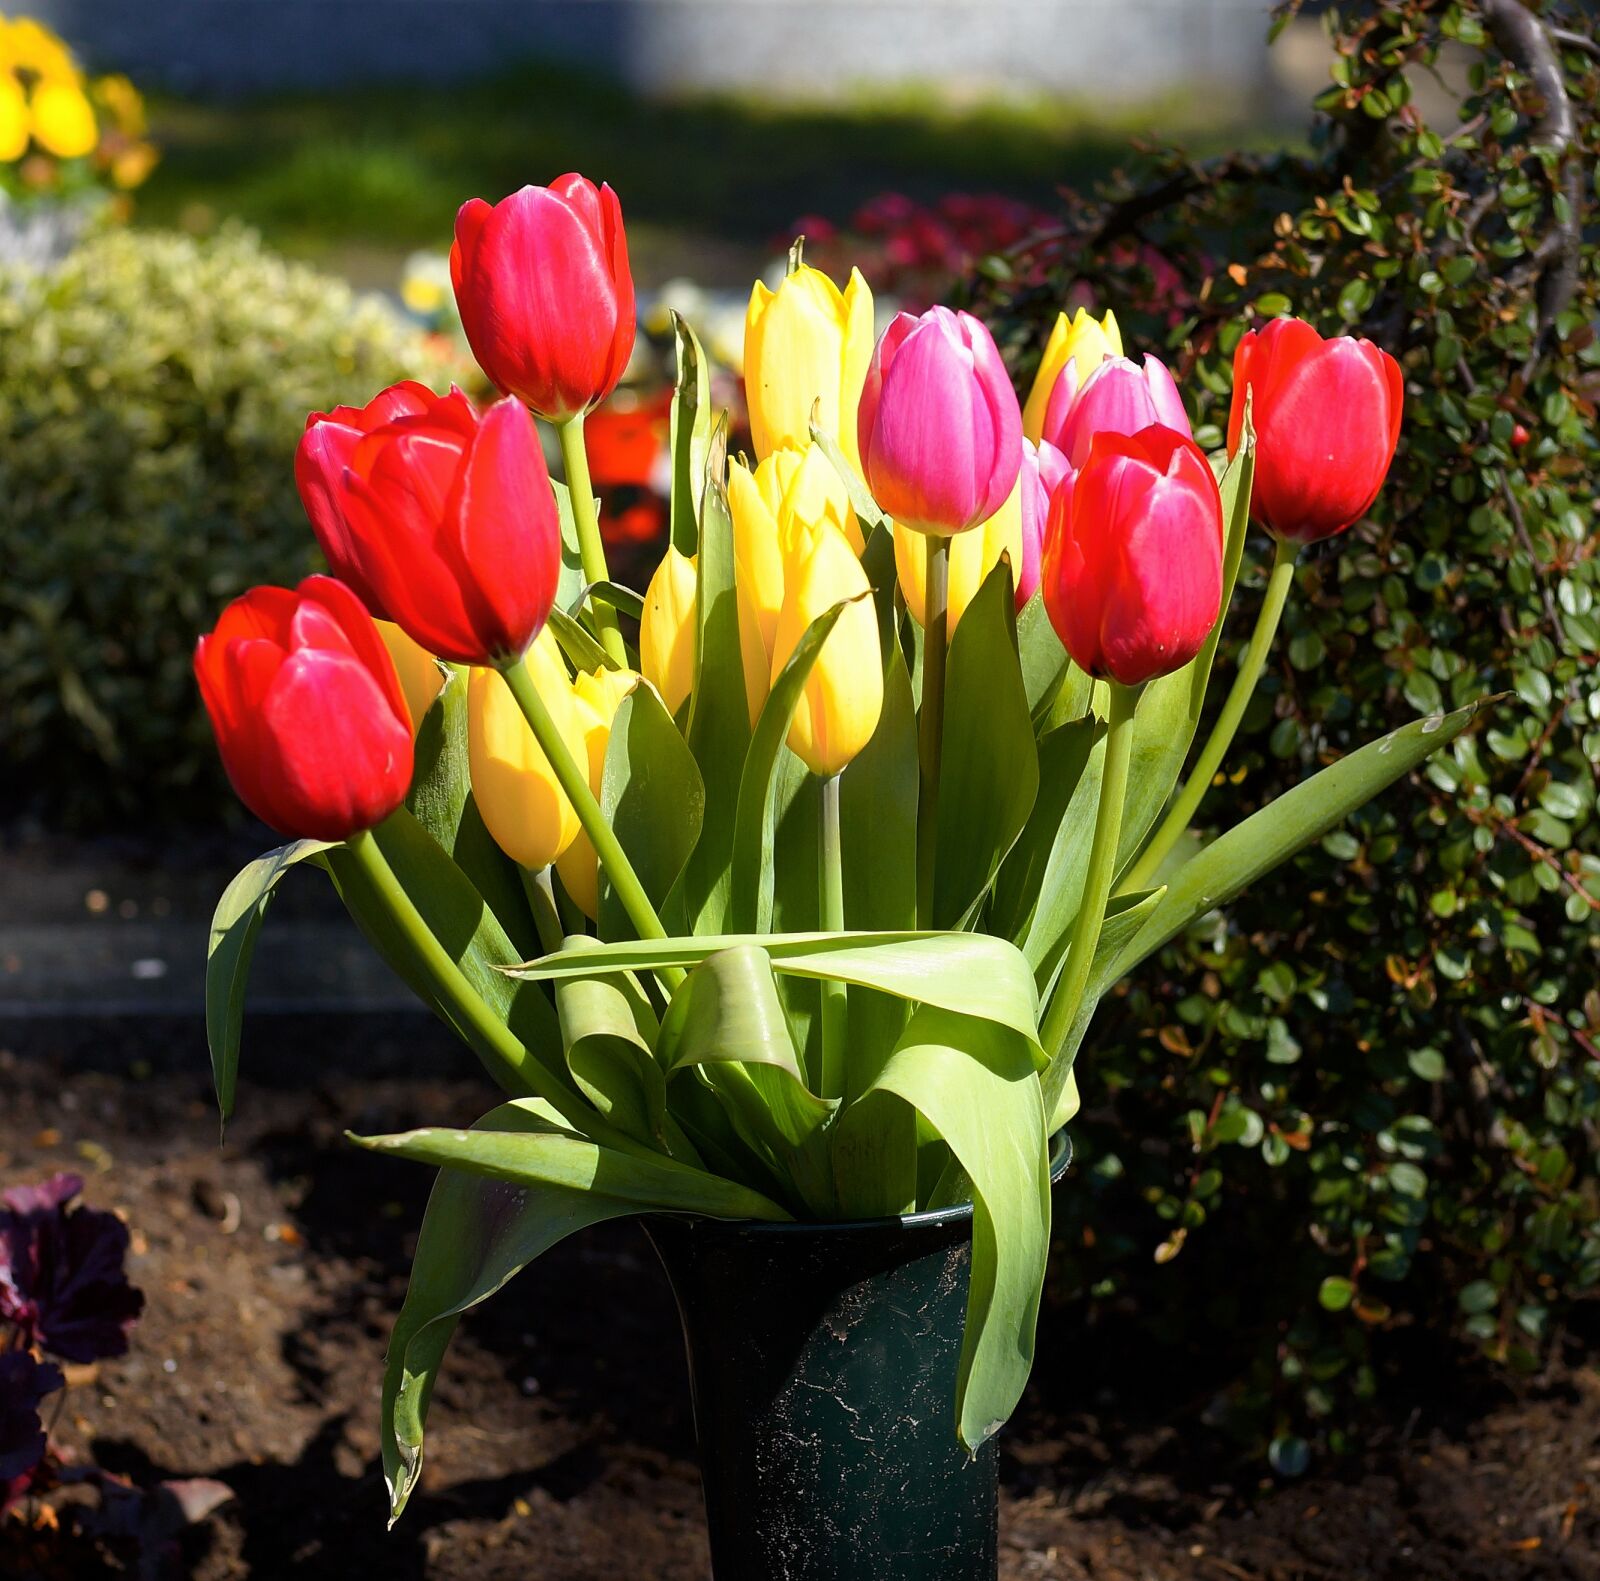 Sony Planar T* 50mm F1.4 ZA SSM sample photo. Tulips, colorful, flowers photography